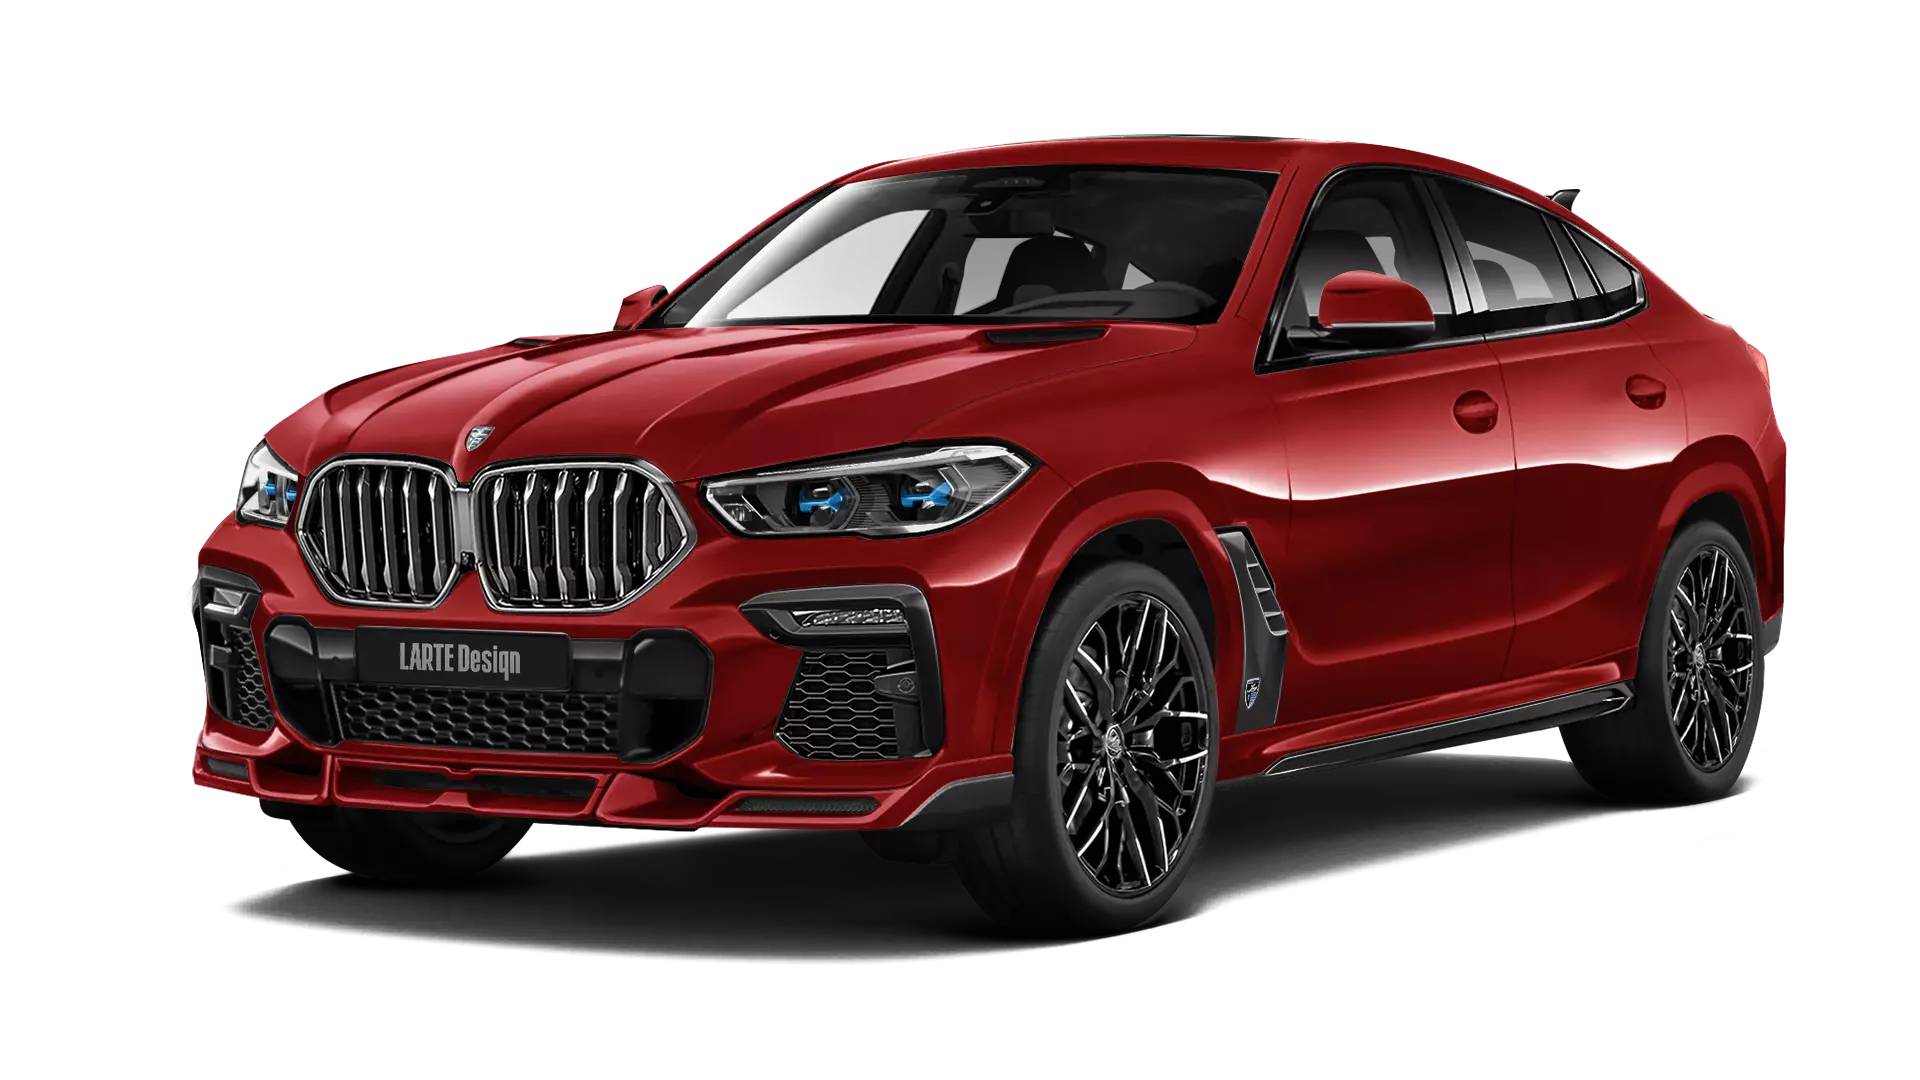 BMW X6 with painted body kit: front view shown in flamenco red